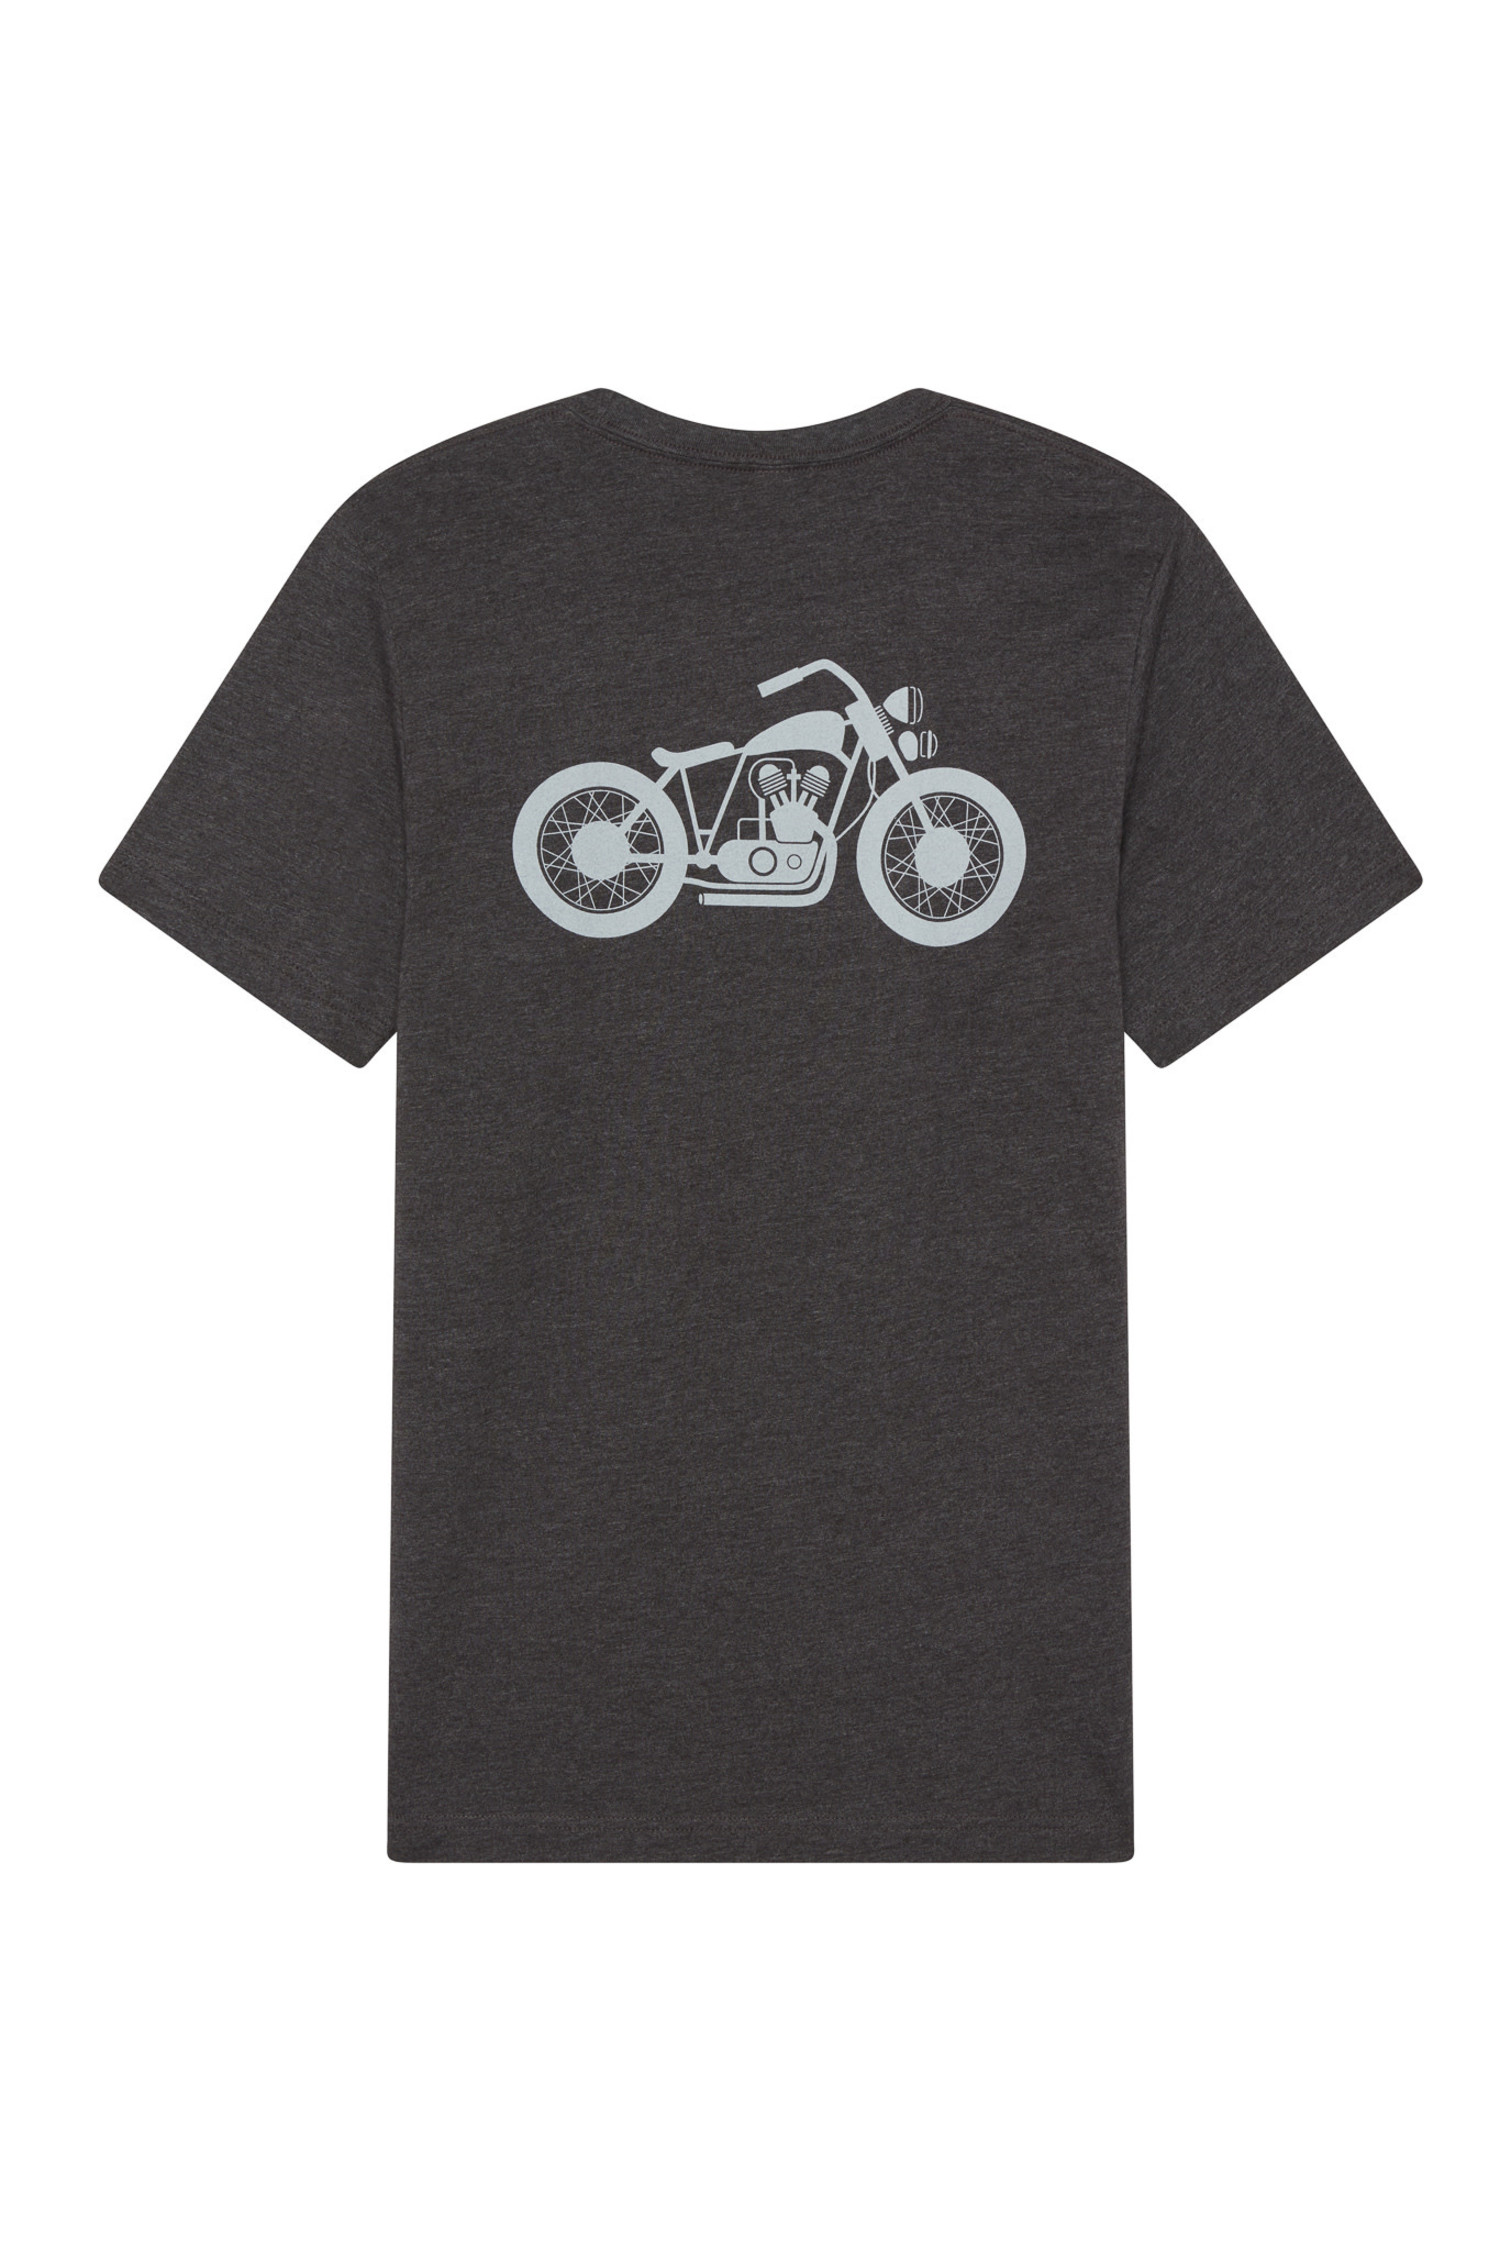 T-shirt Motorcycle Homme - 24 Heures Motos Taille S